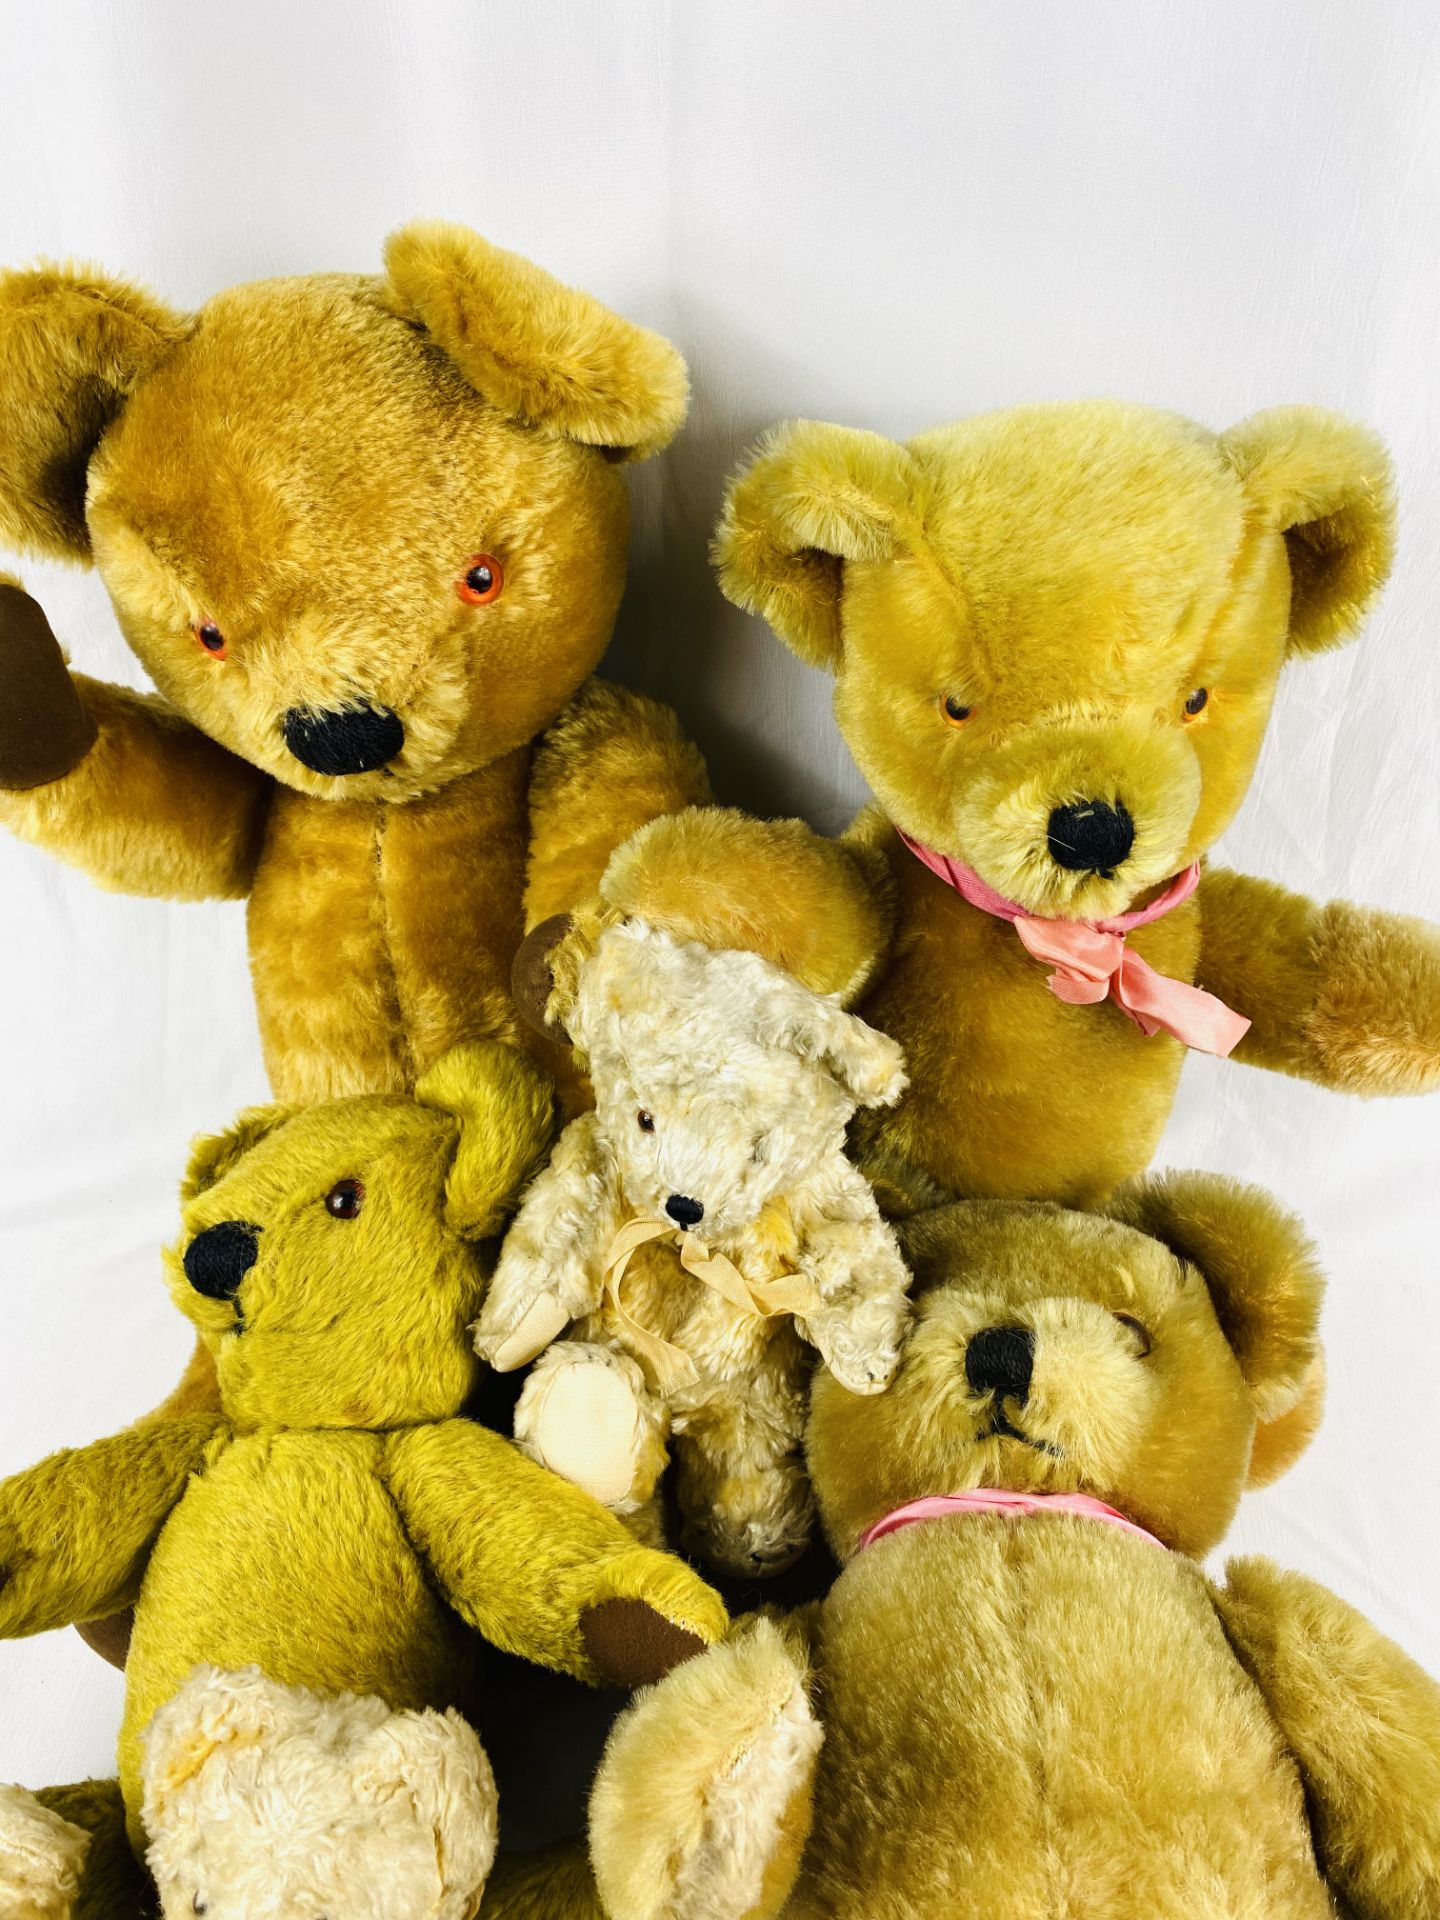 Collection of teddy bears - Image 2 of 5